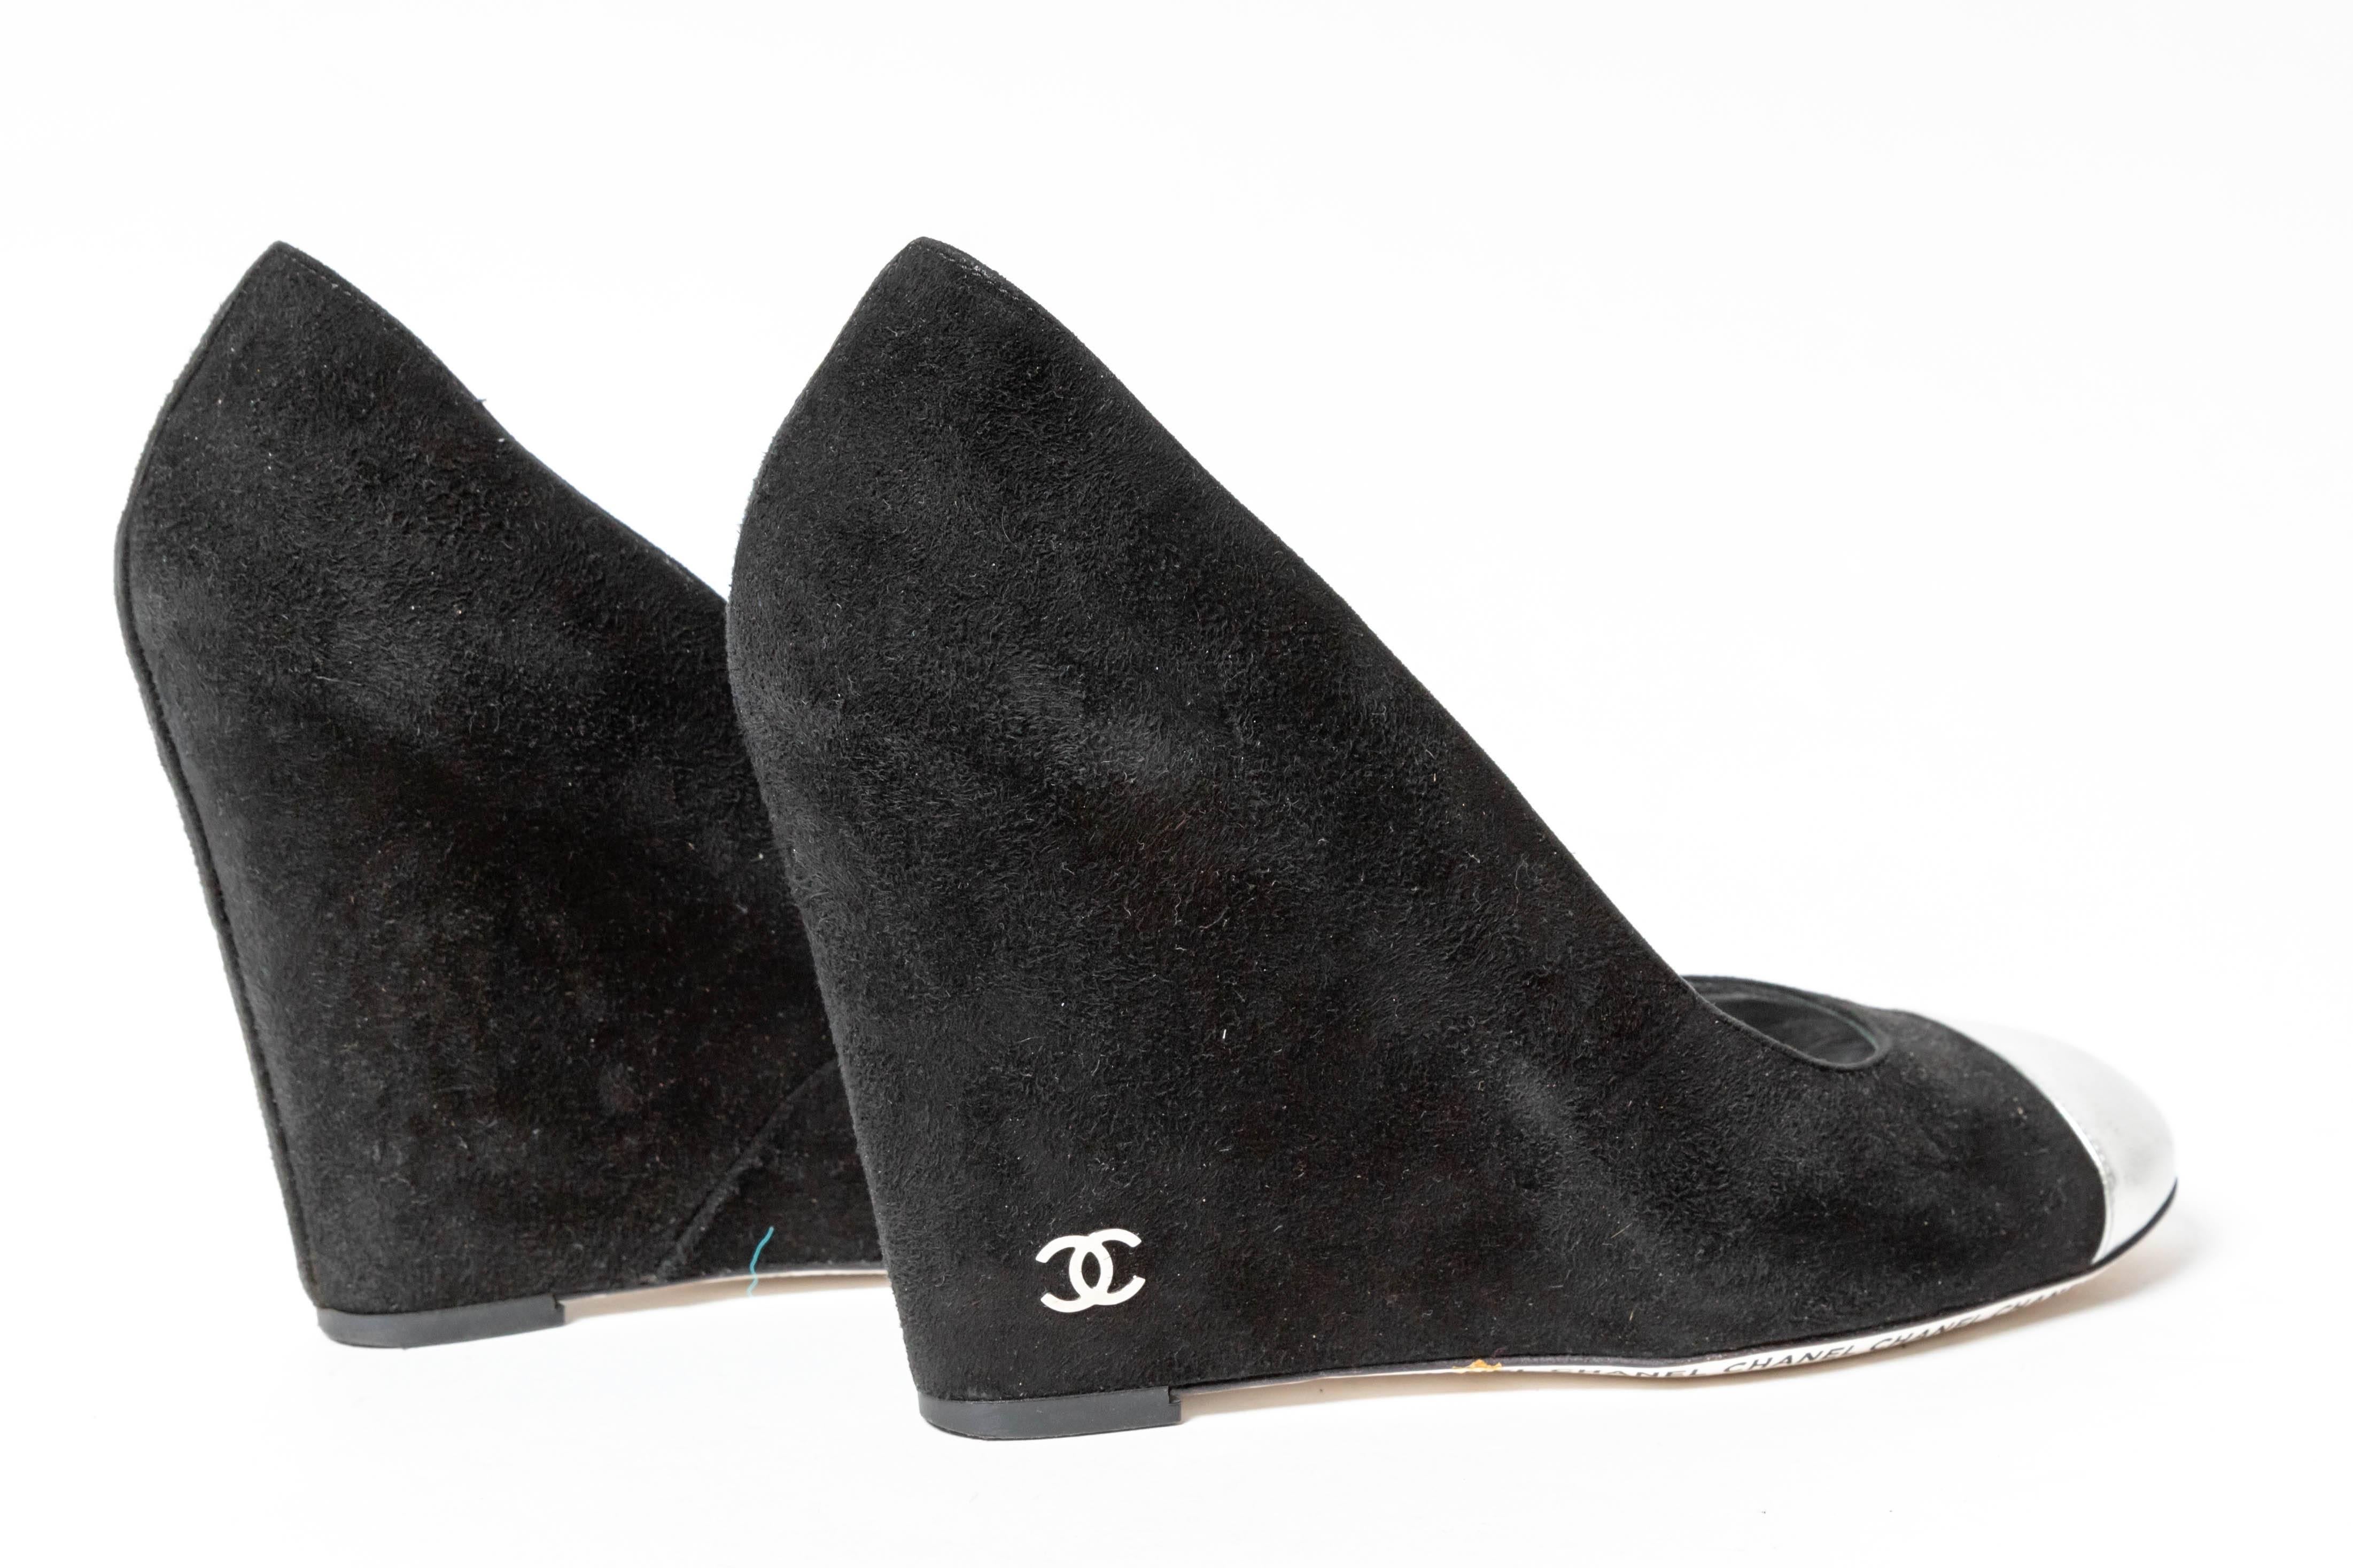 Chanel Silver and Black Suede Wedges - Size 37.5 / 7.5 3